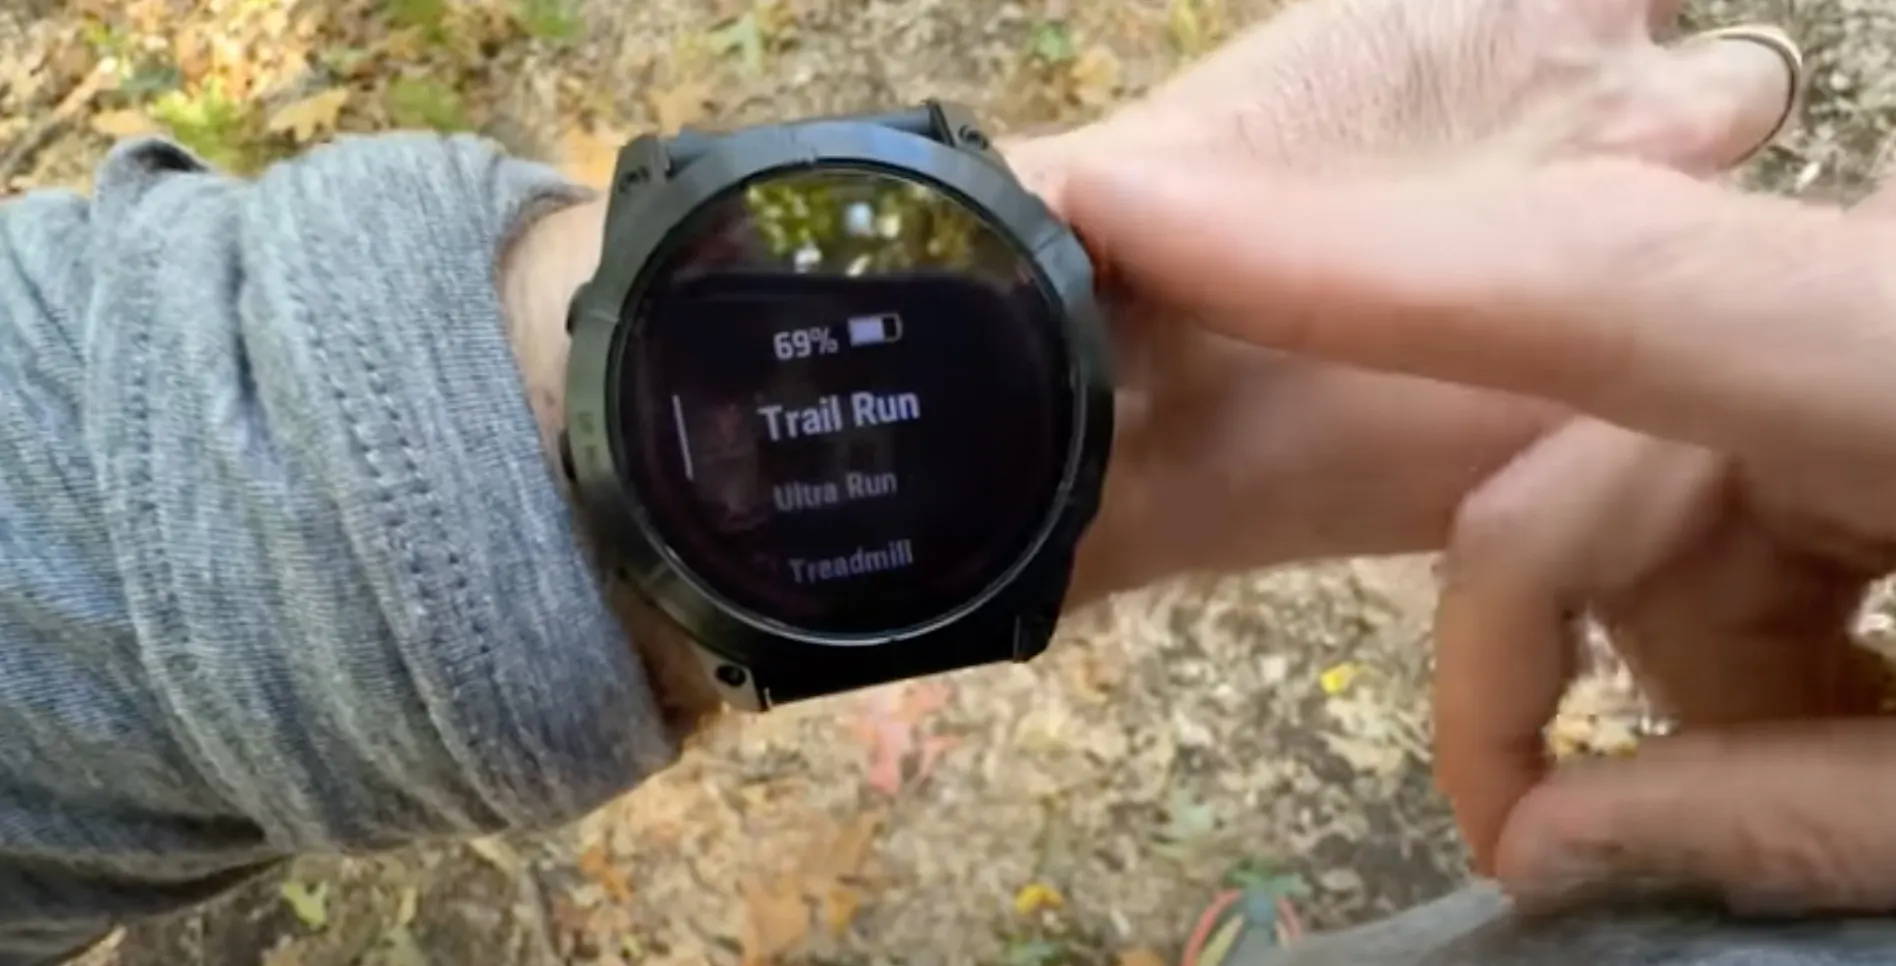 Dave showing the Garmin fenix 7X with the Trail Run activity profile